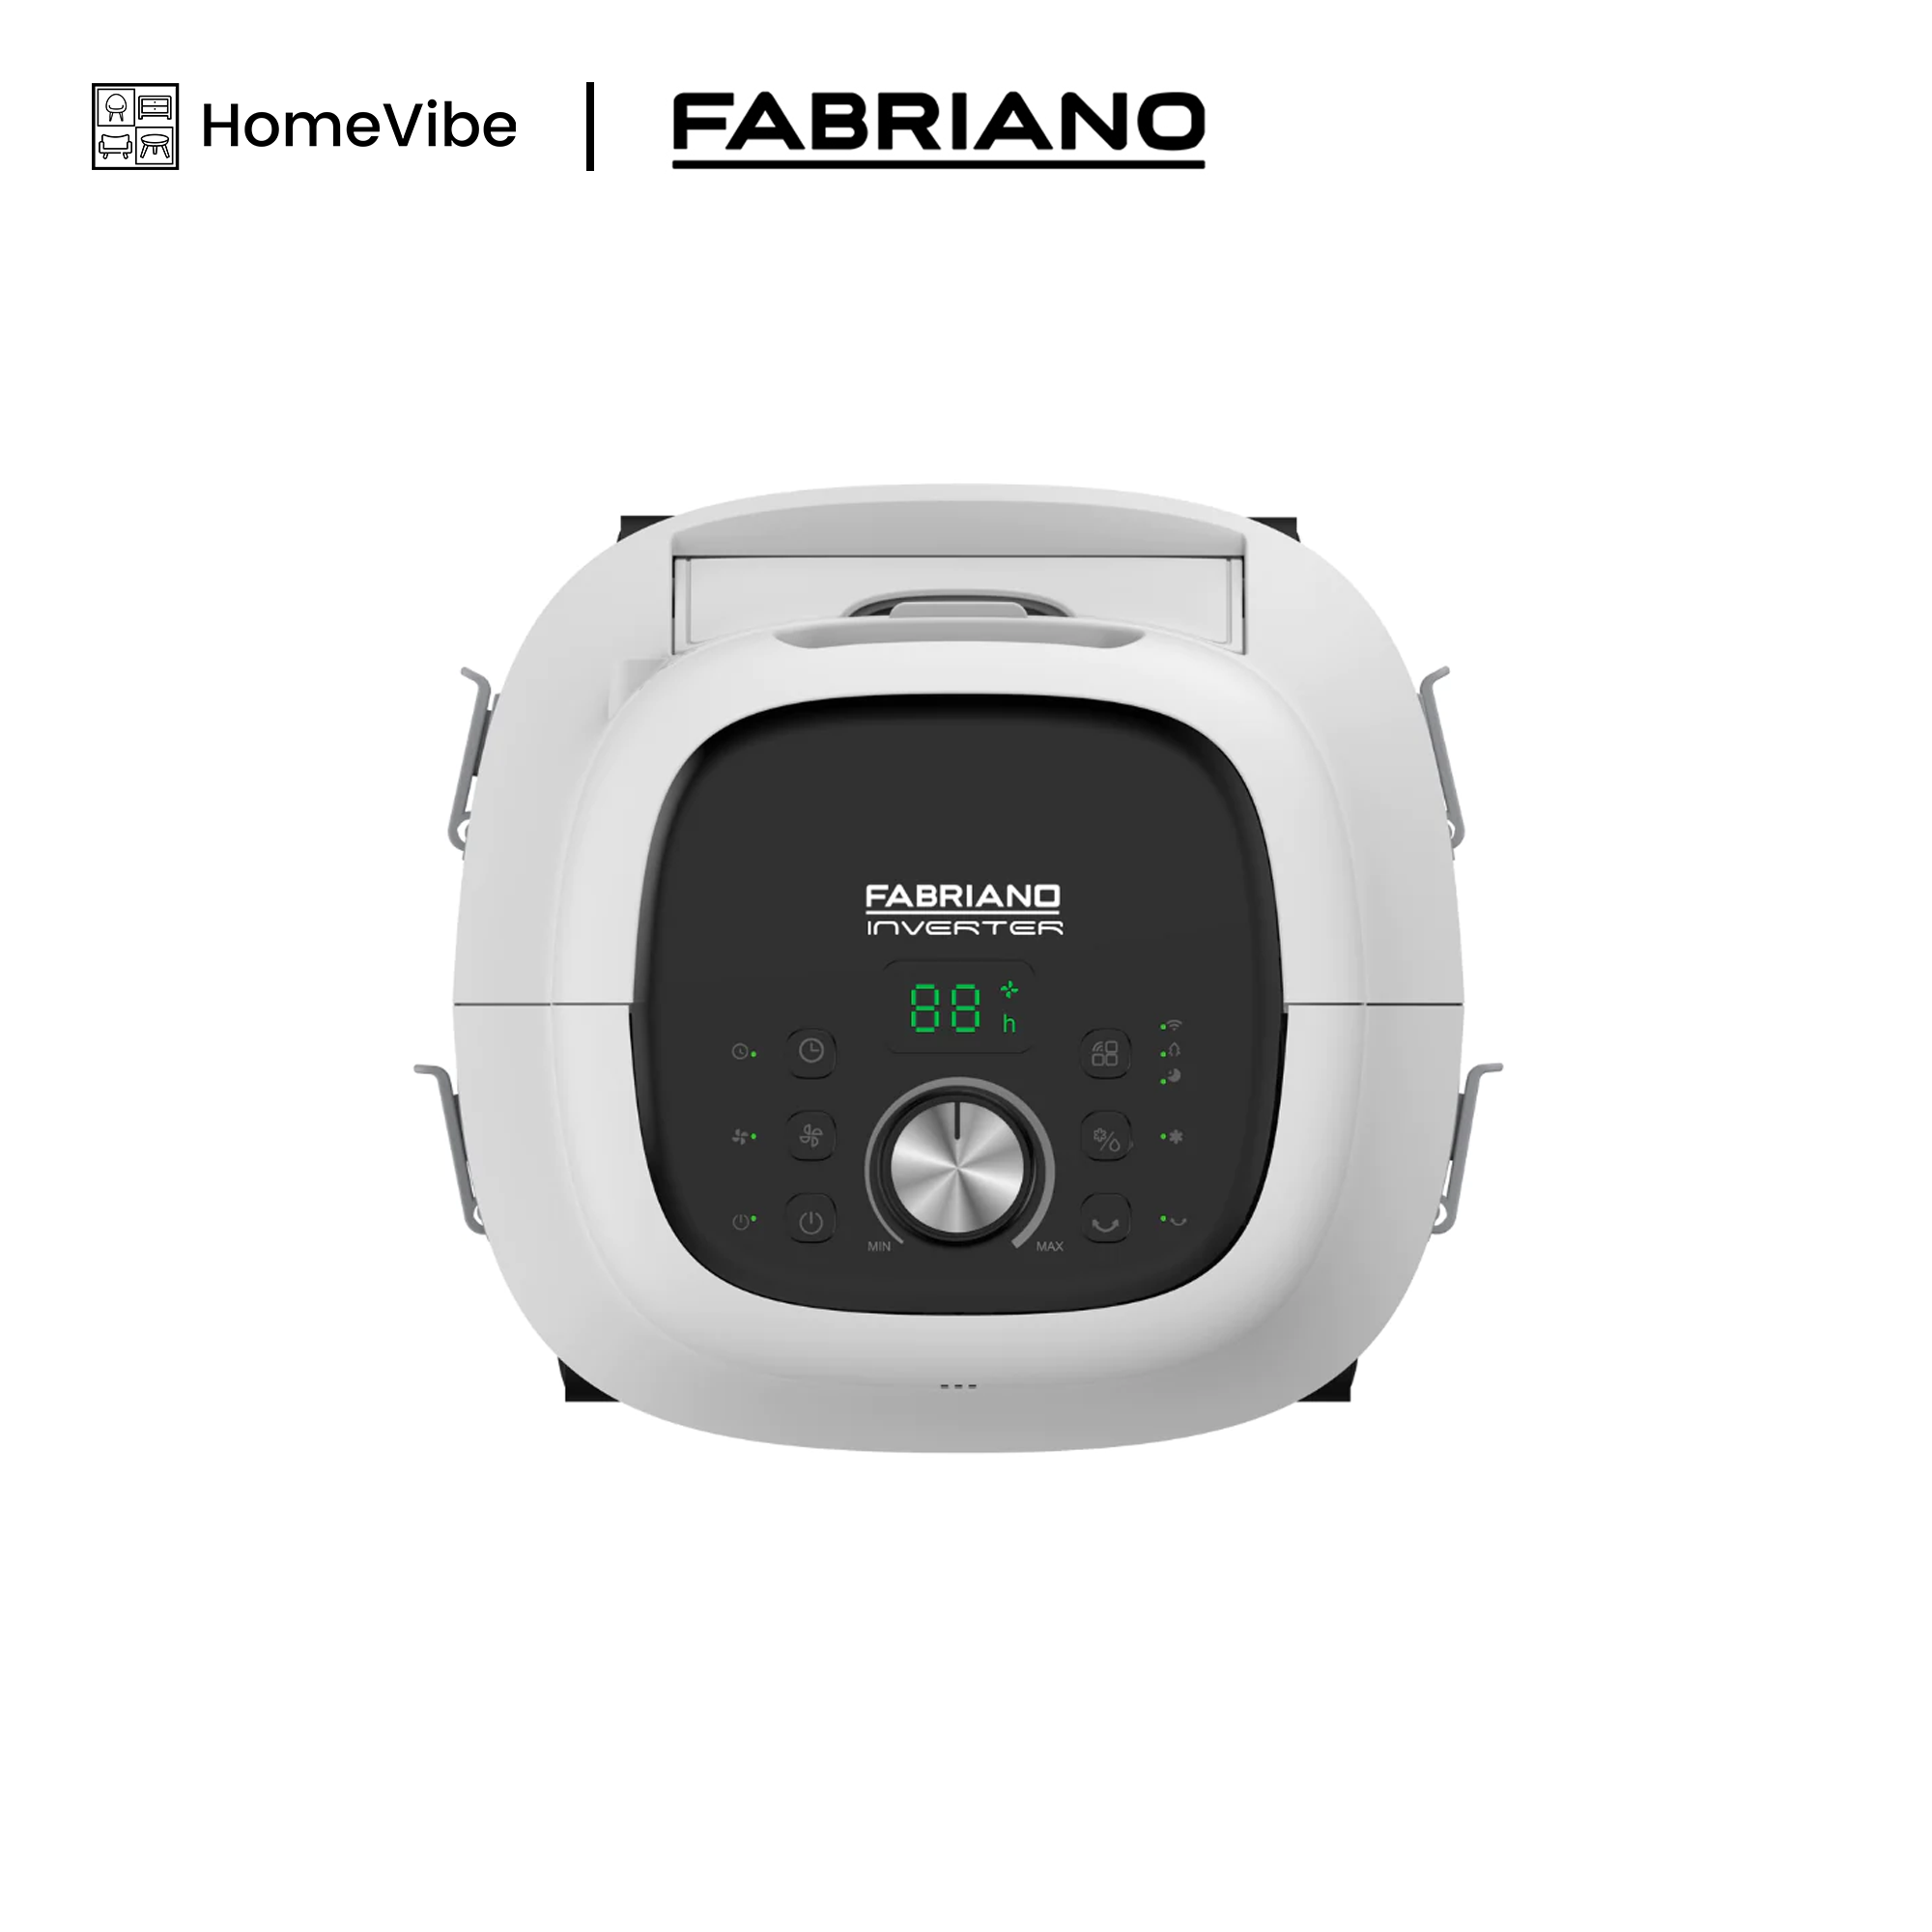 Fabriano 10L INVERTER Air Cooler FACE10SWG-I  *** PRE-ORDER